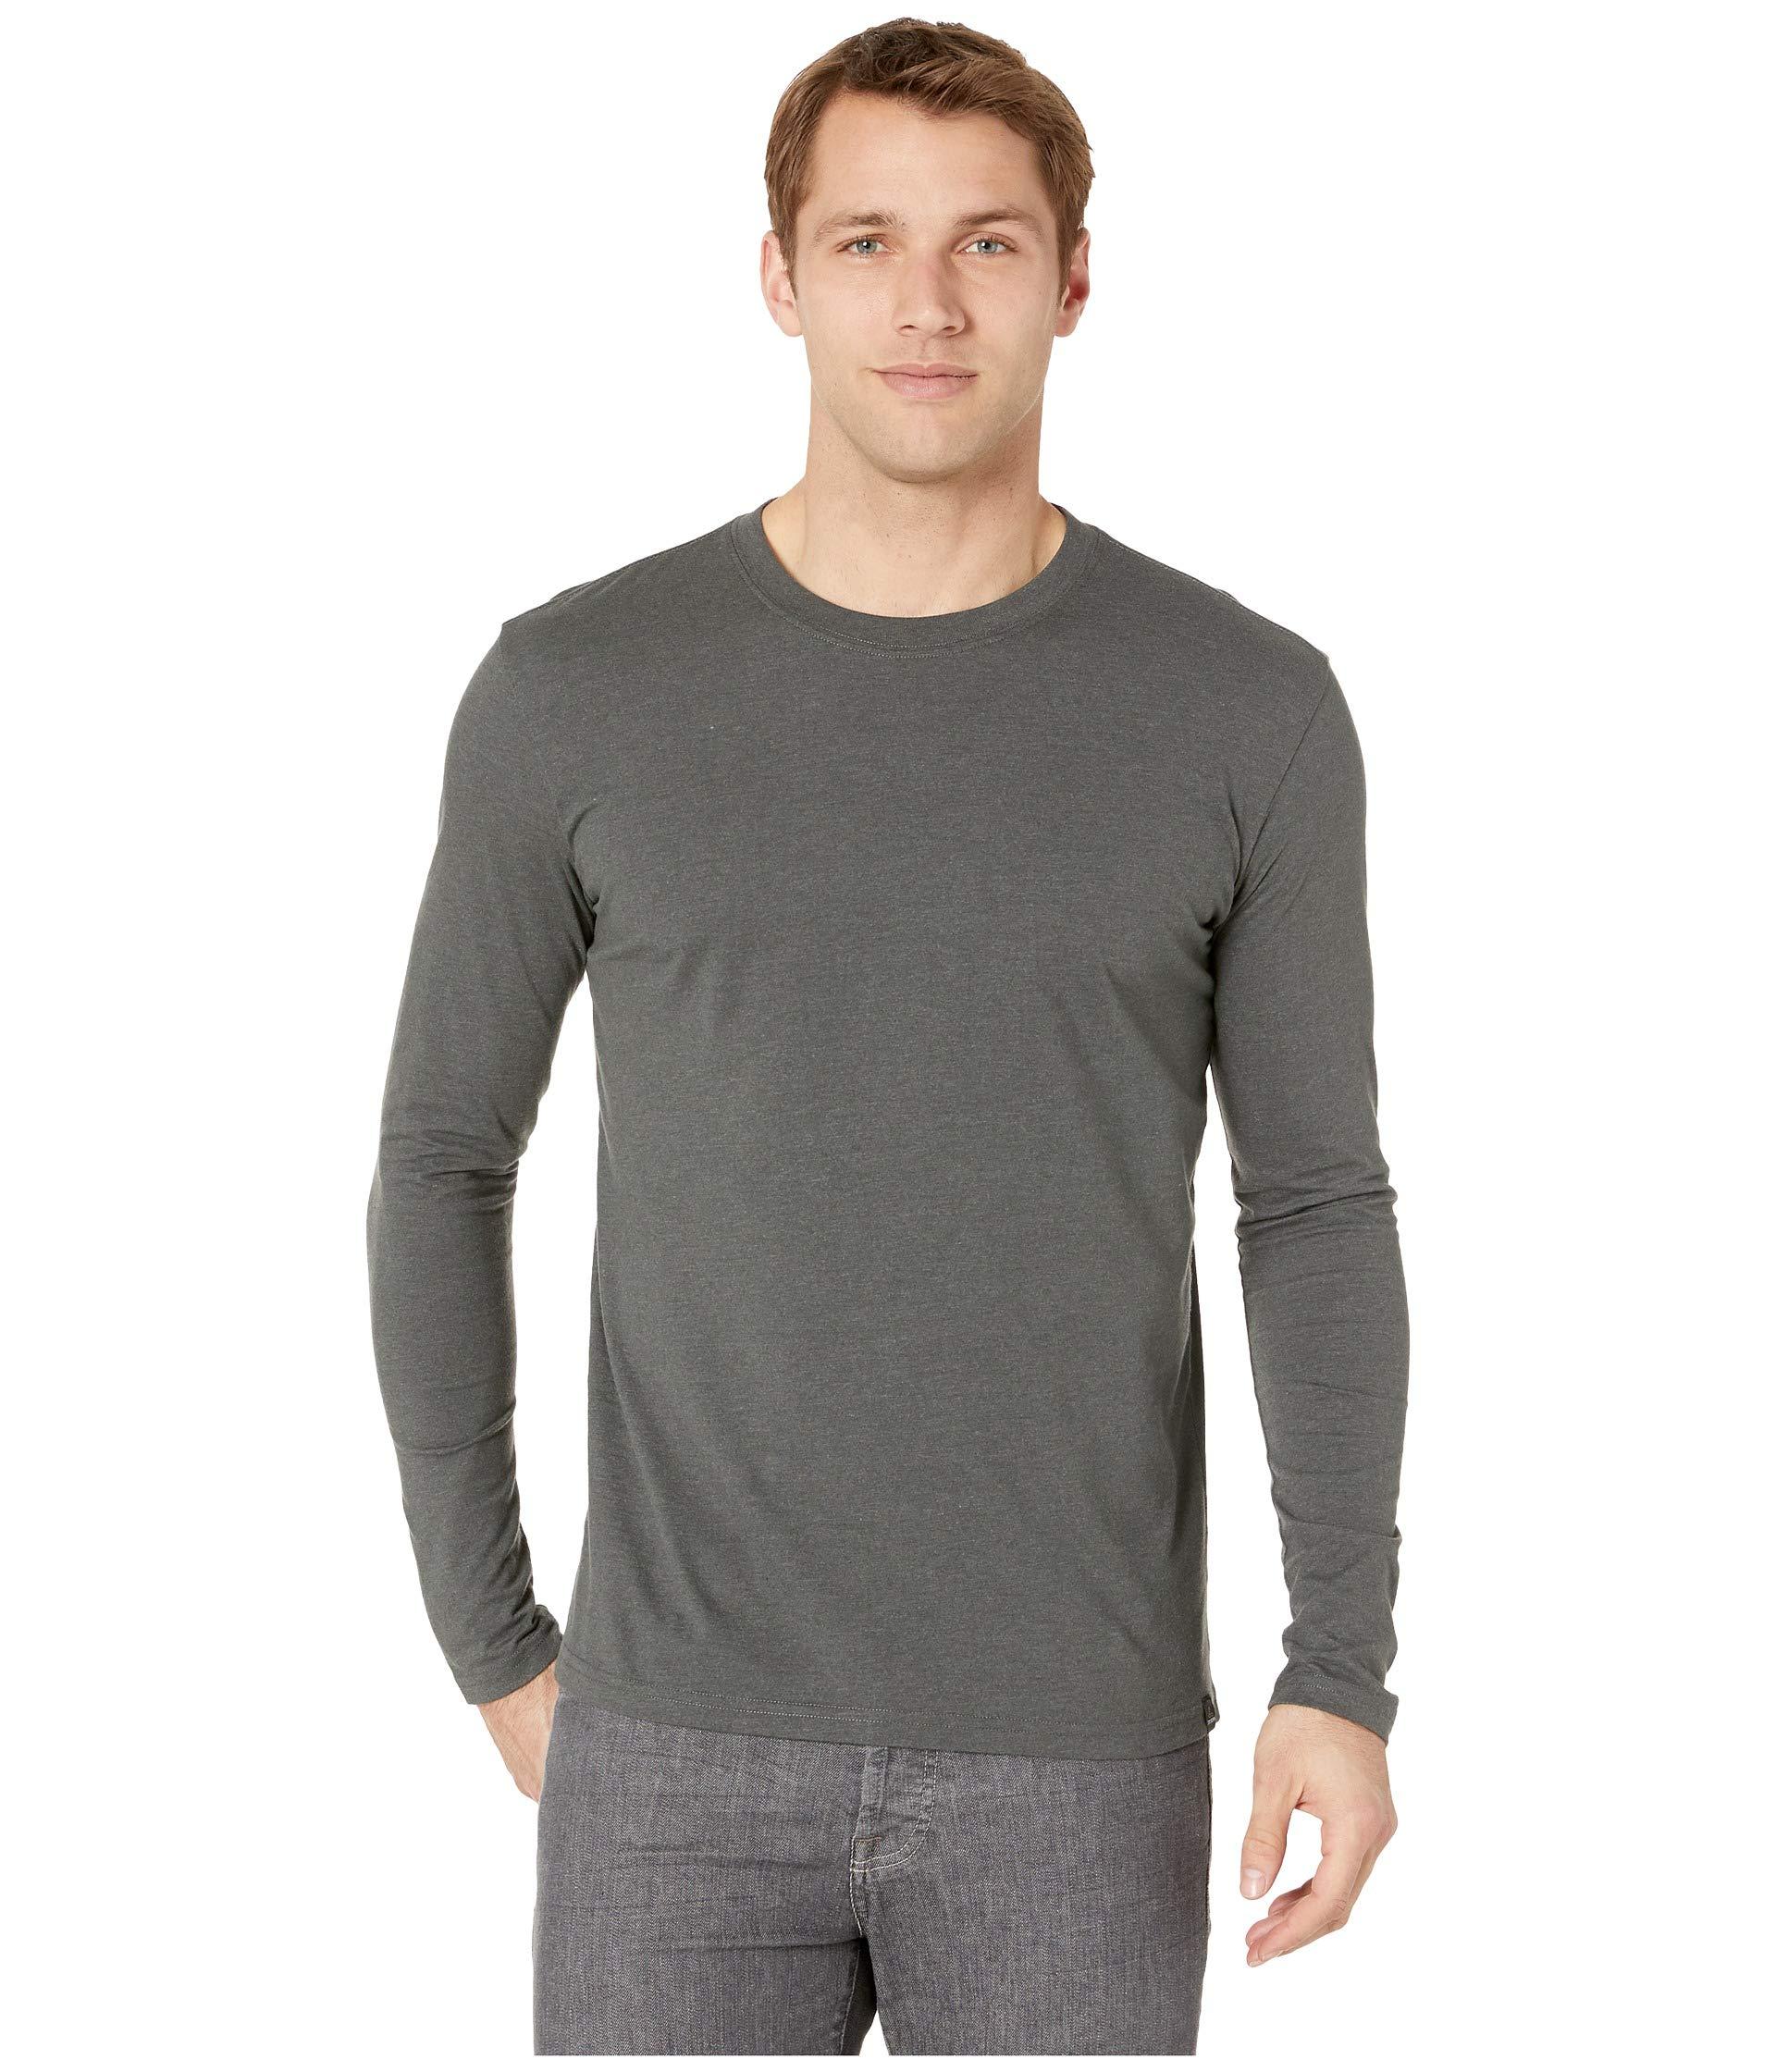 Prana Cotton Long Sleeve T-shirt in Charcoal Heather (Gray) for Men - Lyst